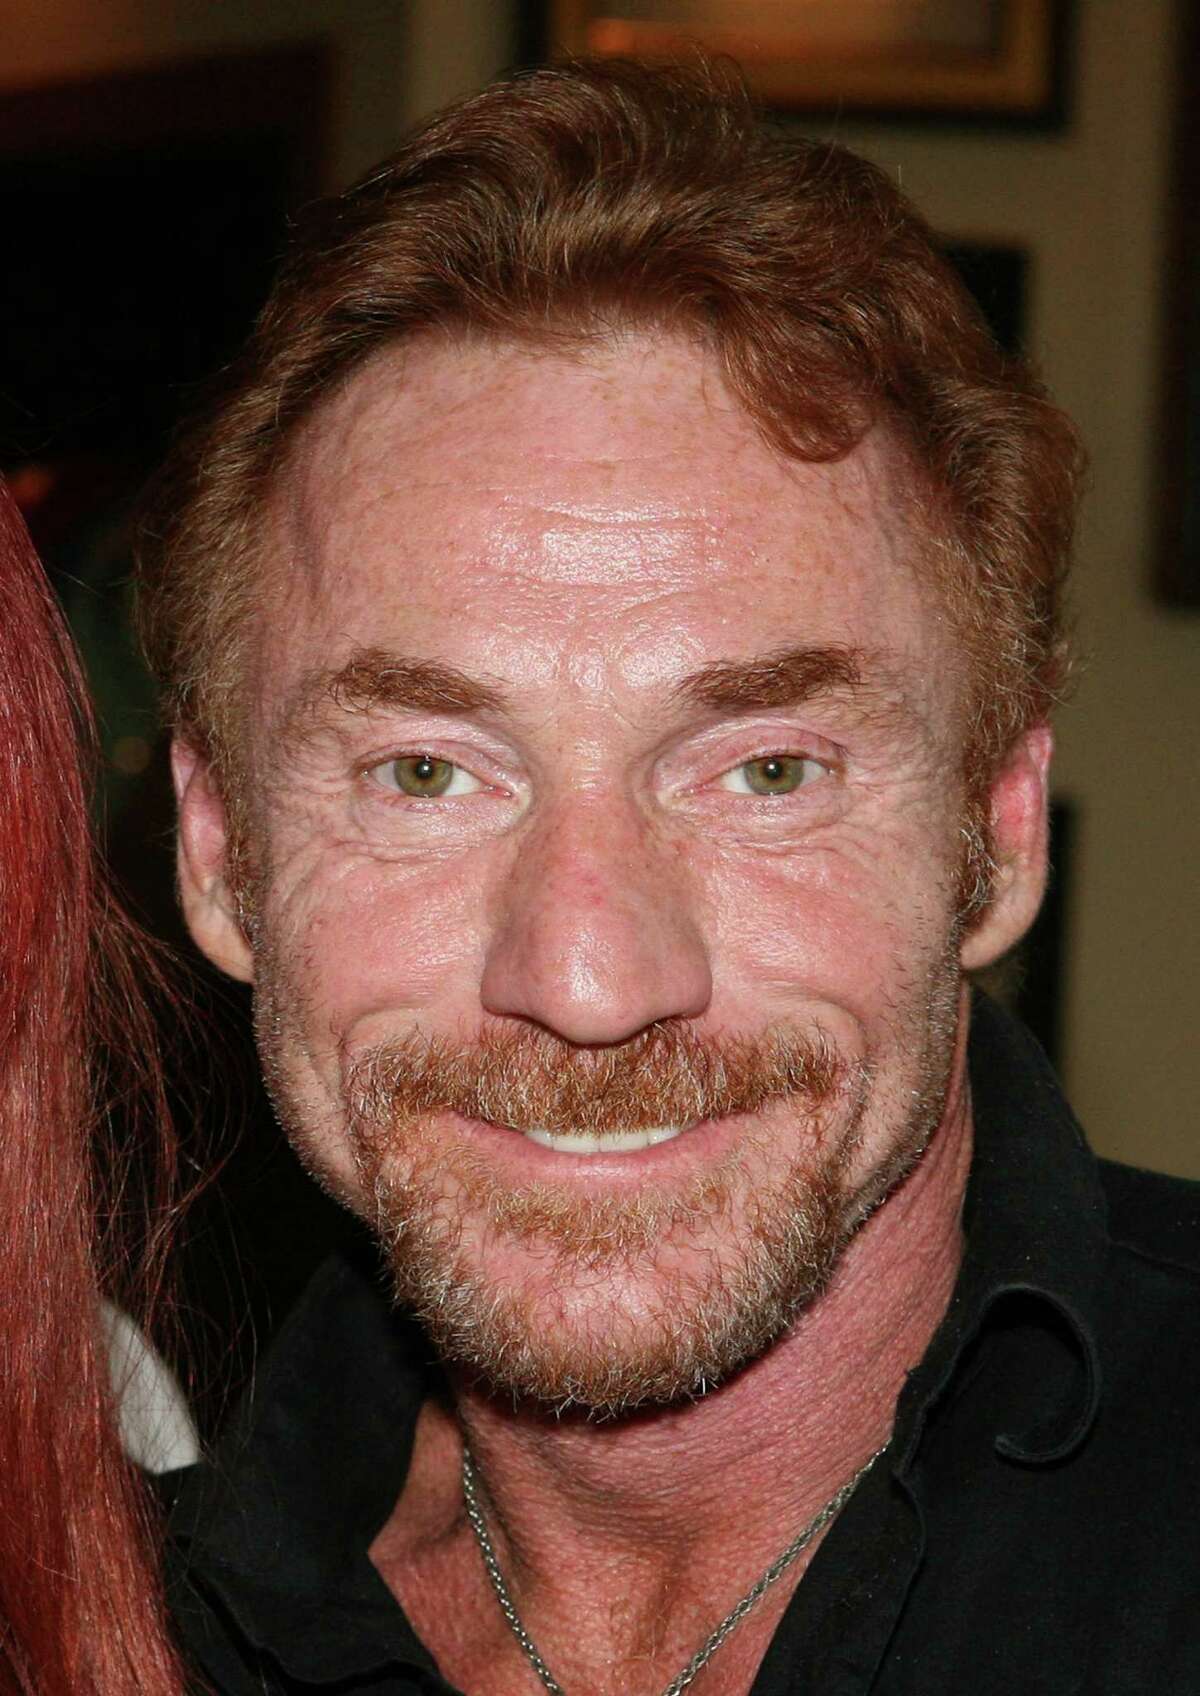 **FILE**In this file photo originally provided by the Hard Rock Cafe, Danny Bonaduce is shown during an event inside the Hard Rock Cafe at Universal City Walk, on in this Feb. 9, 2007, file photo in Los Angeles. (AP Photo/Hard Rock Cafe, Rene Macura, file) ** NO SALES **